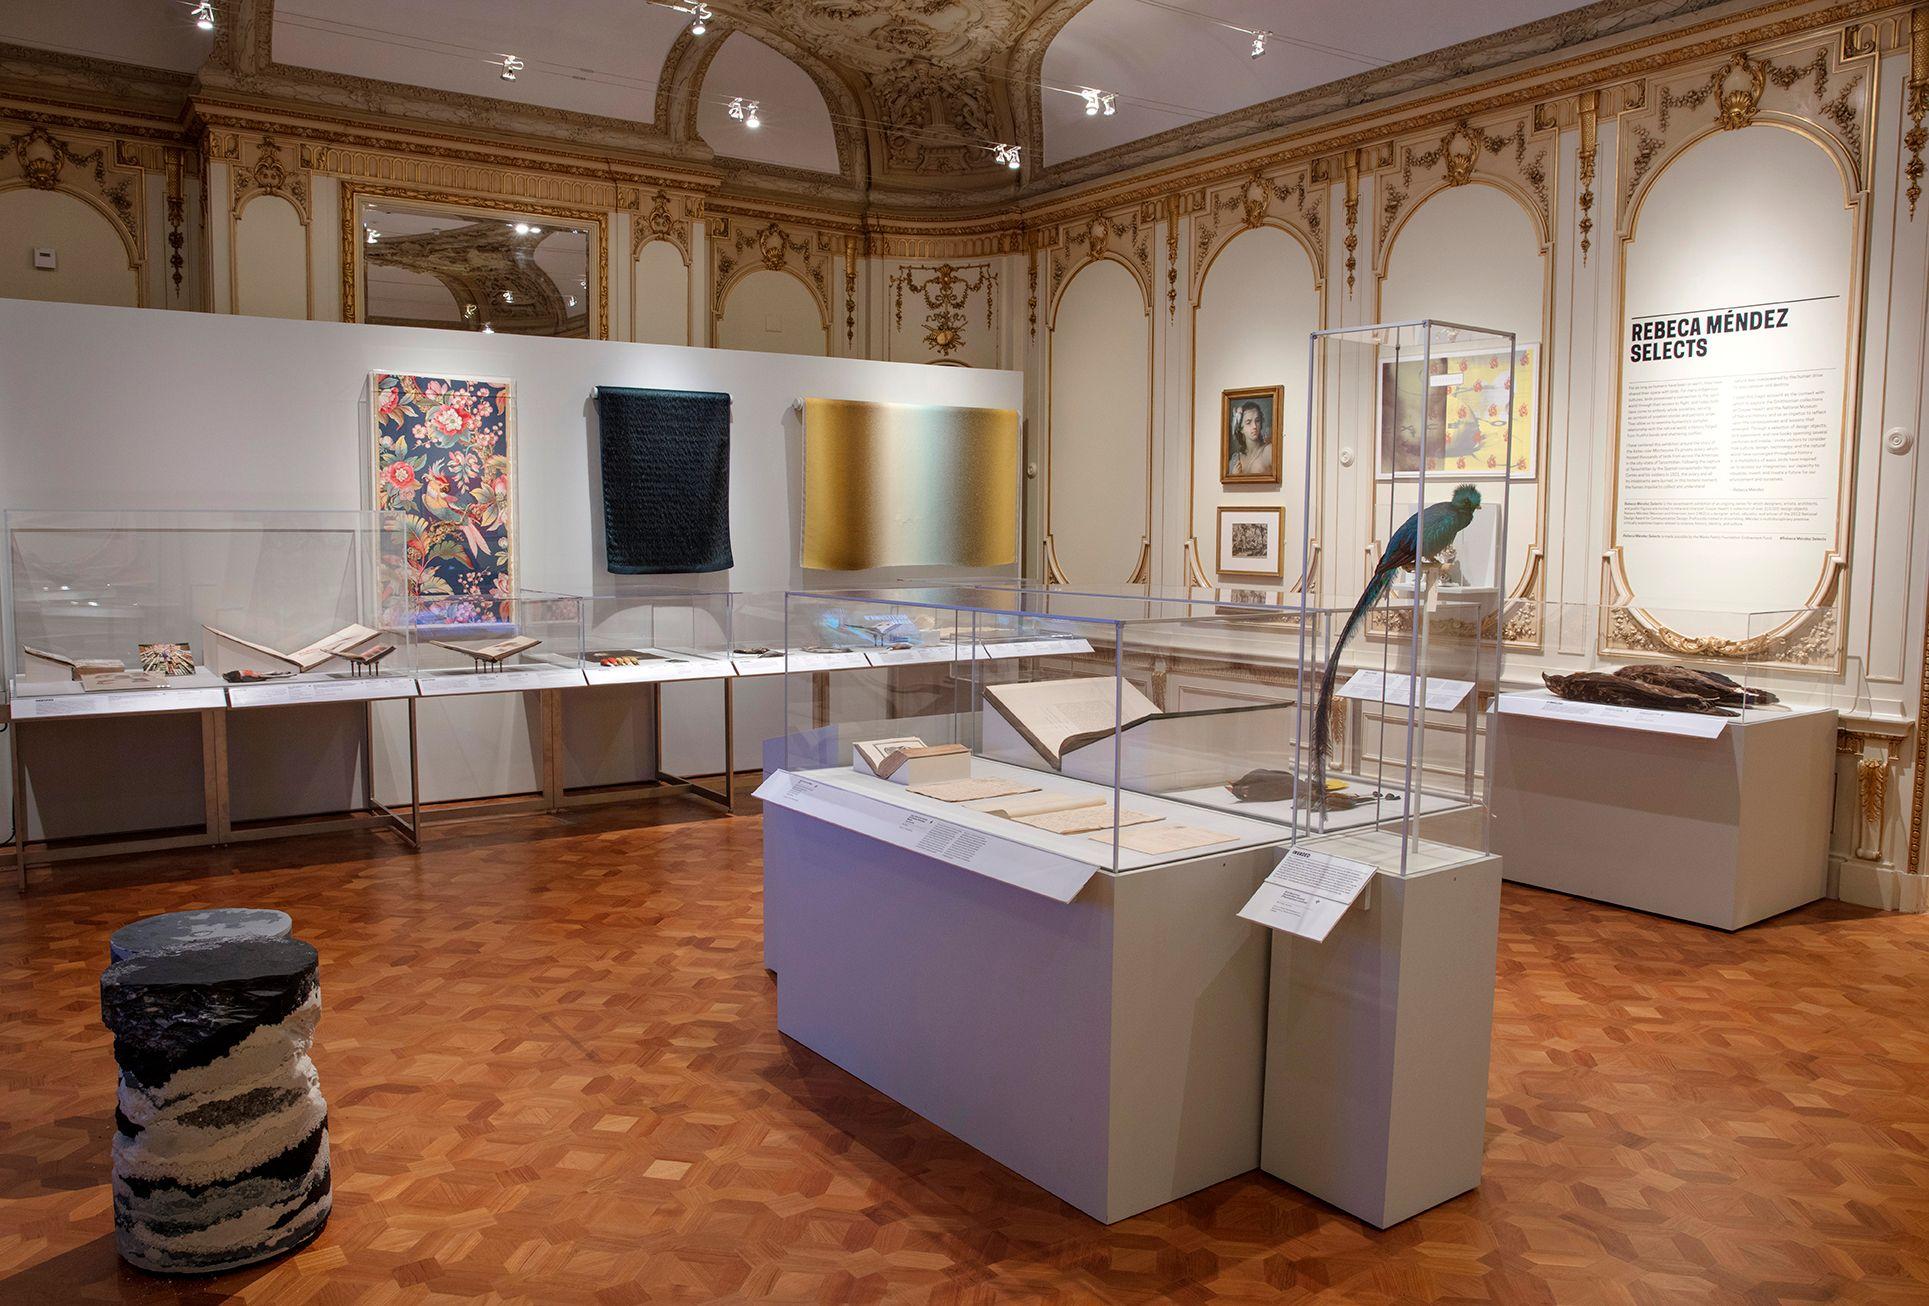 The gallery of the Cooper-Hewitt Design Museum with textile and art prints of birds on the walls, cabinets with various artworks, including books, archive documents, skins of beautiful birds, and contemporary works. 